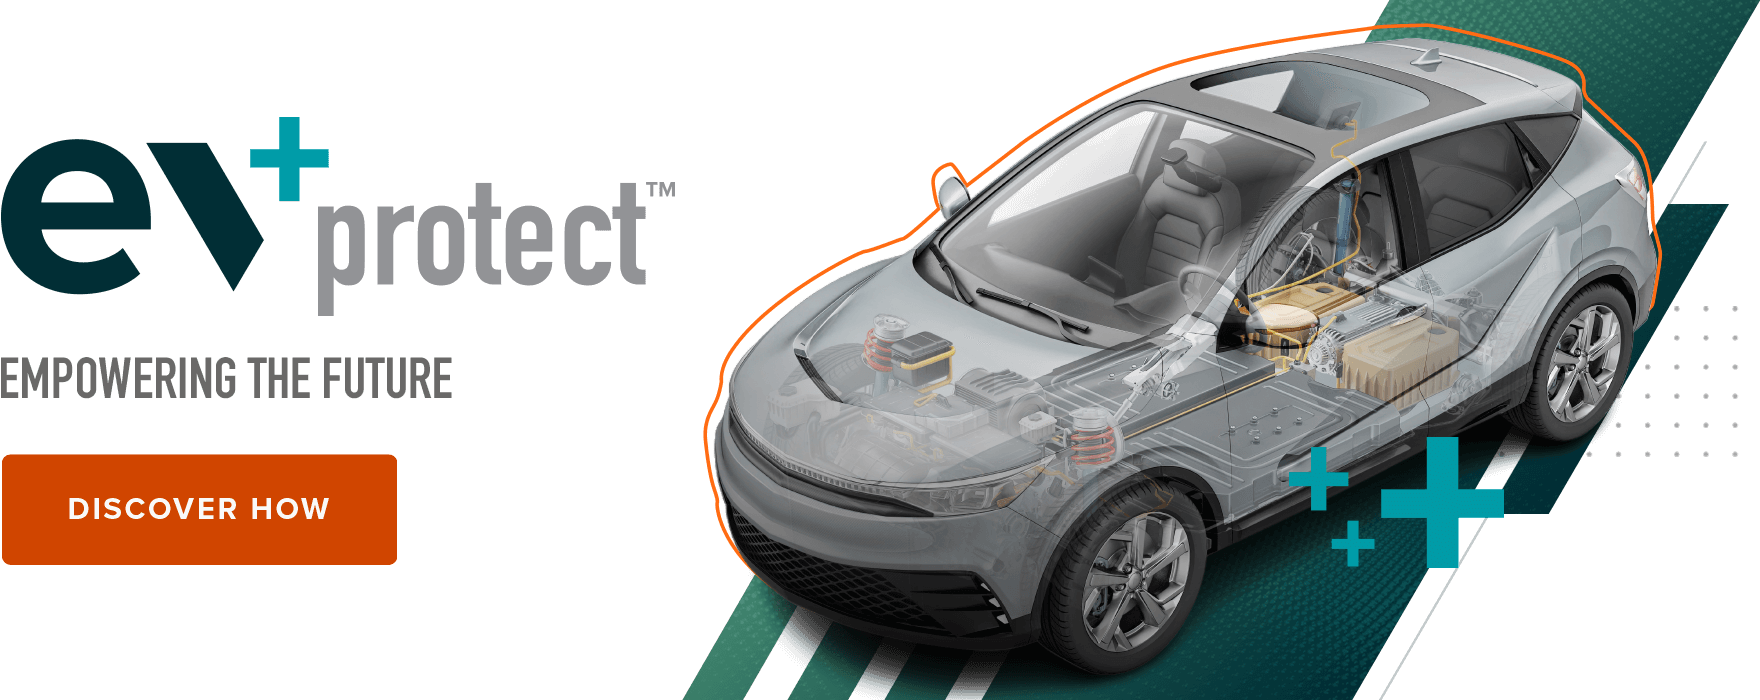 EV+ Protect - The Most Comprehensive EV Limited Warranty - Discover How